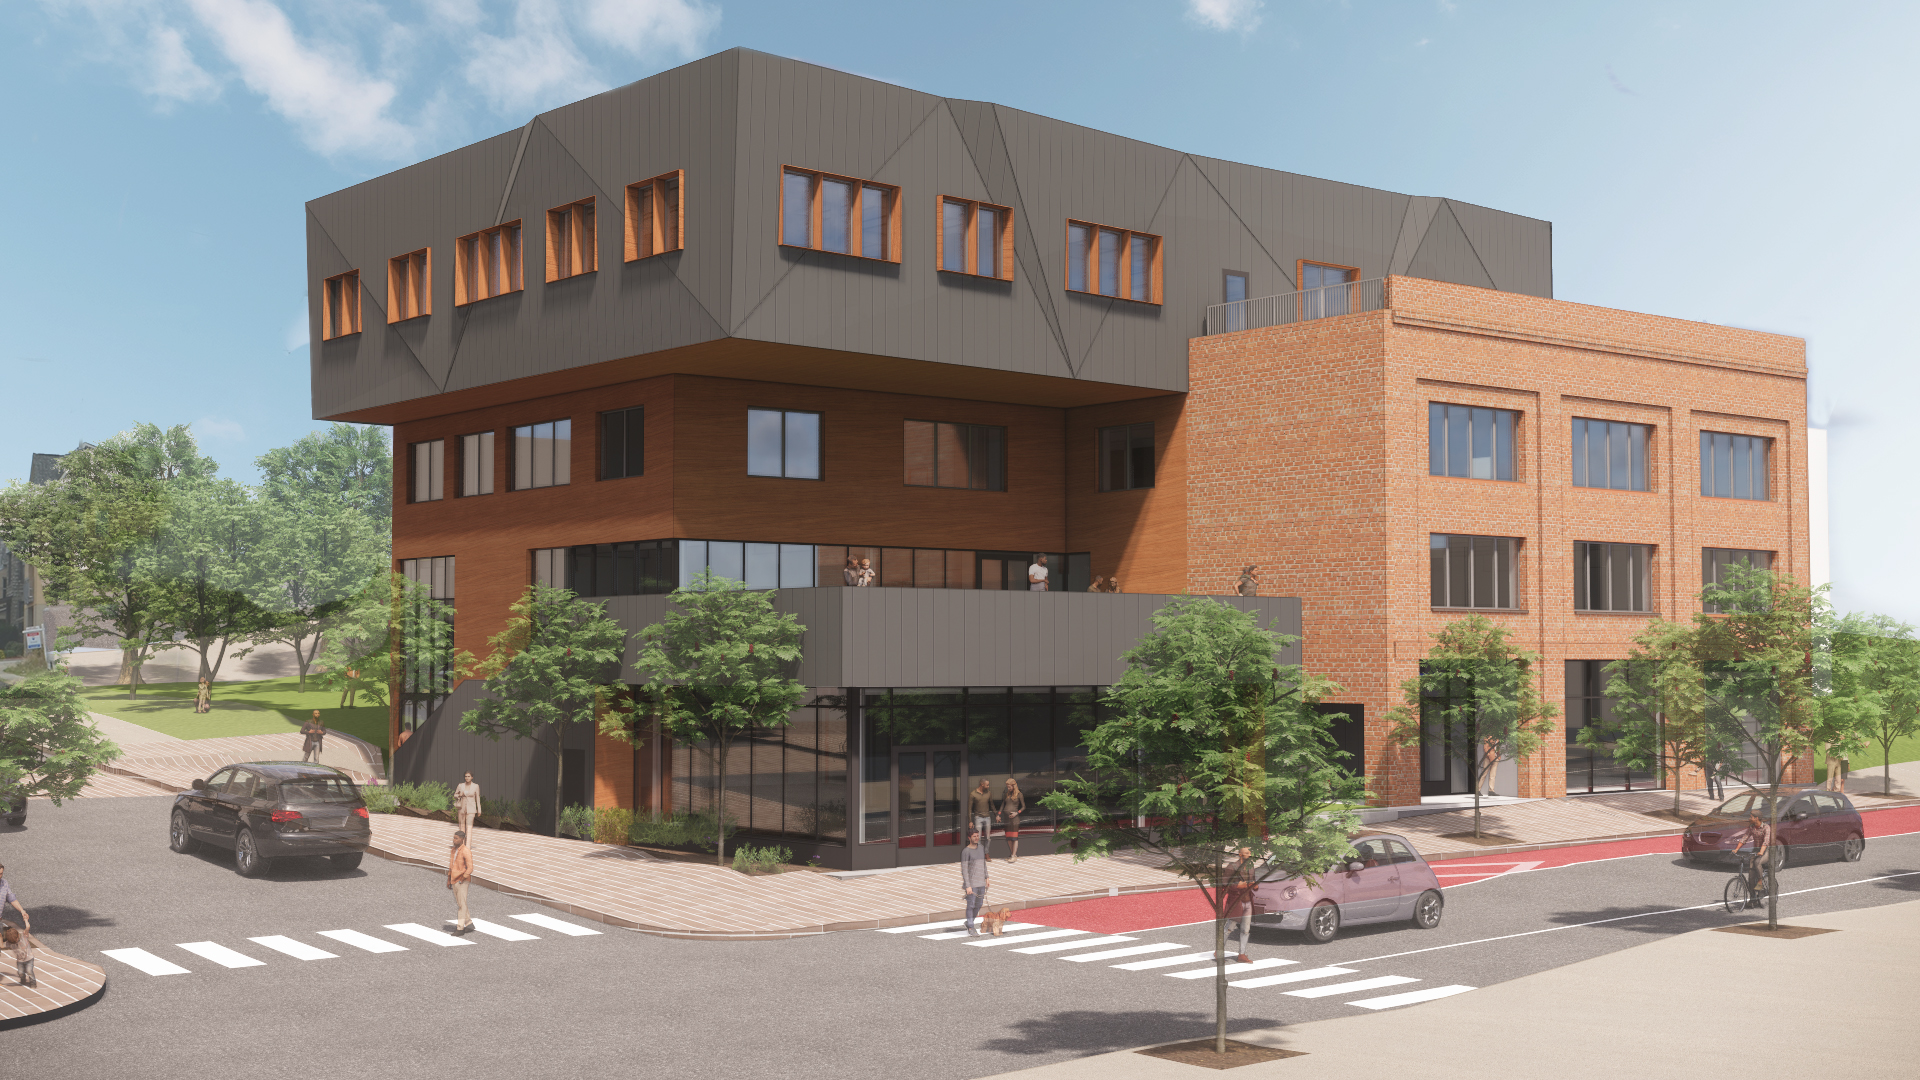 Update on an Ambitious Pittsburgh Passive House Development